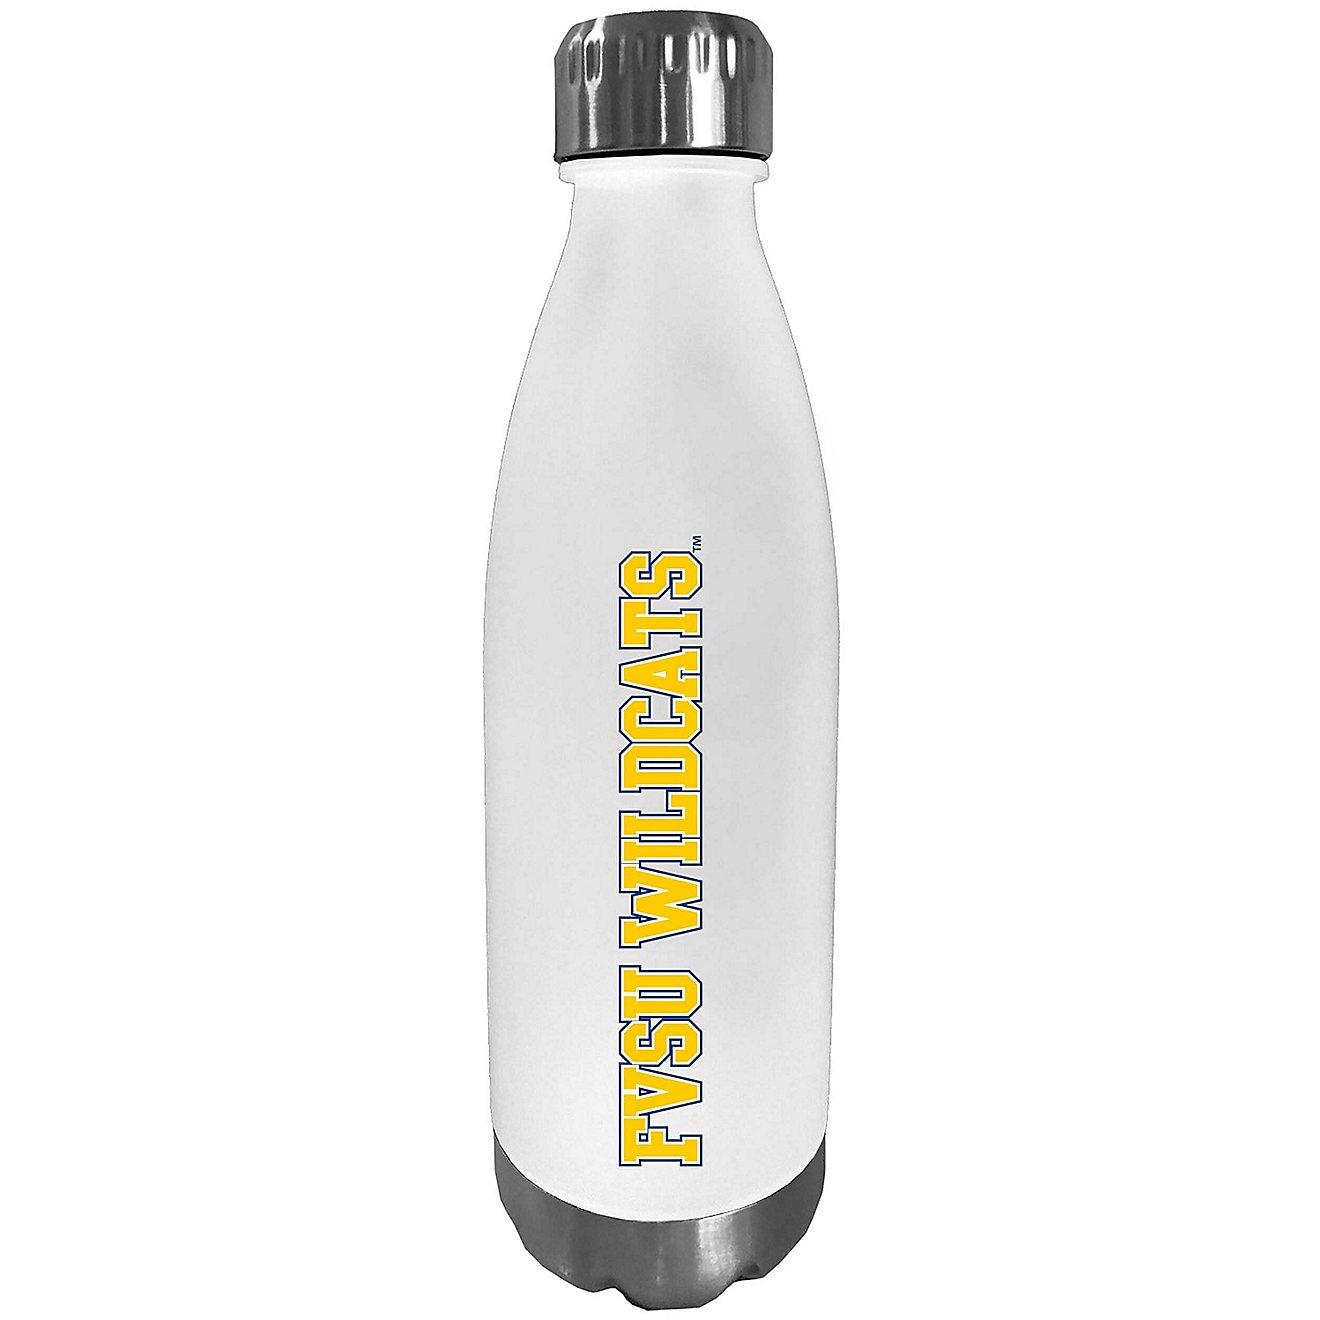 https://academy.scene7.com/is/image/academy//novelty/fort-valley-state-wildcats-24oz-frosted-bullet-water-bottle-fvsu-fan-fblt24-white-white/54df93ef2ad94891bf185c3ce7180835?$pdp-mobile-gallery-ng$